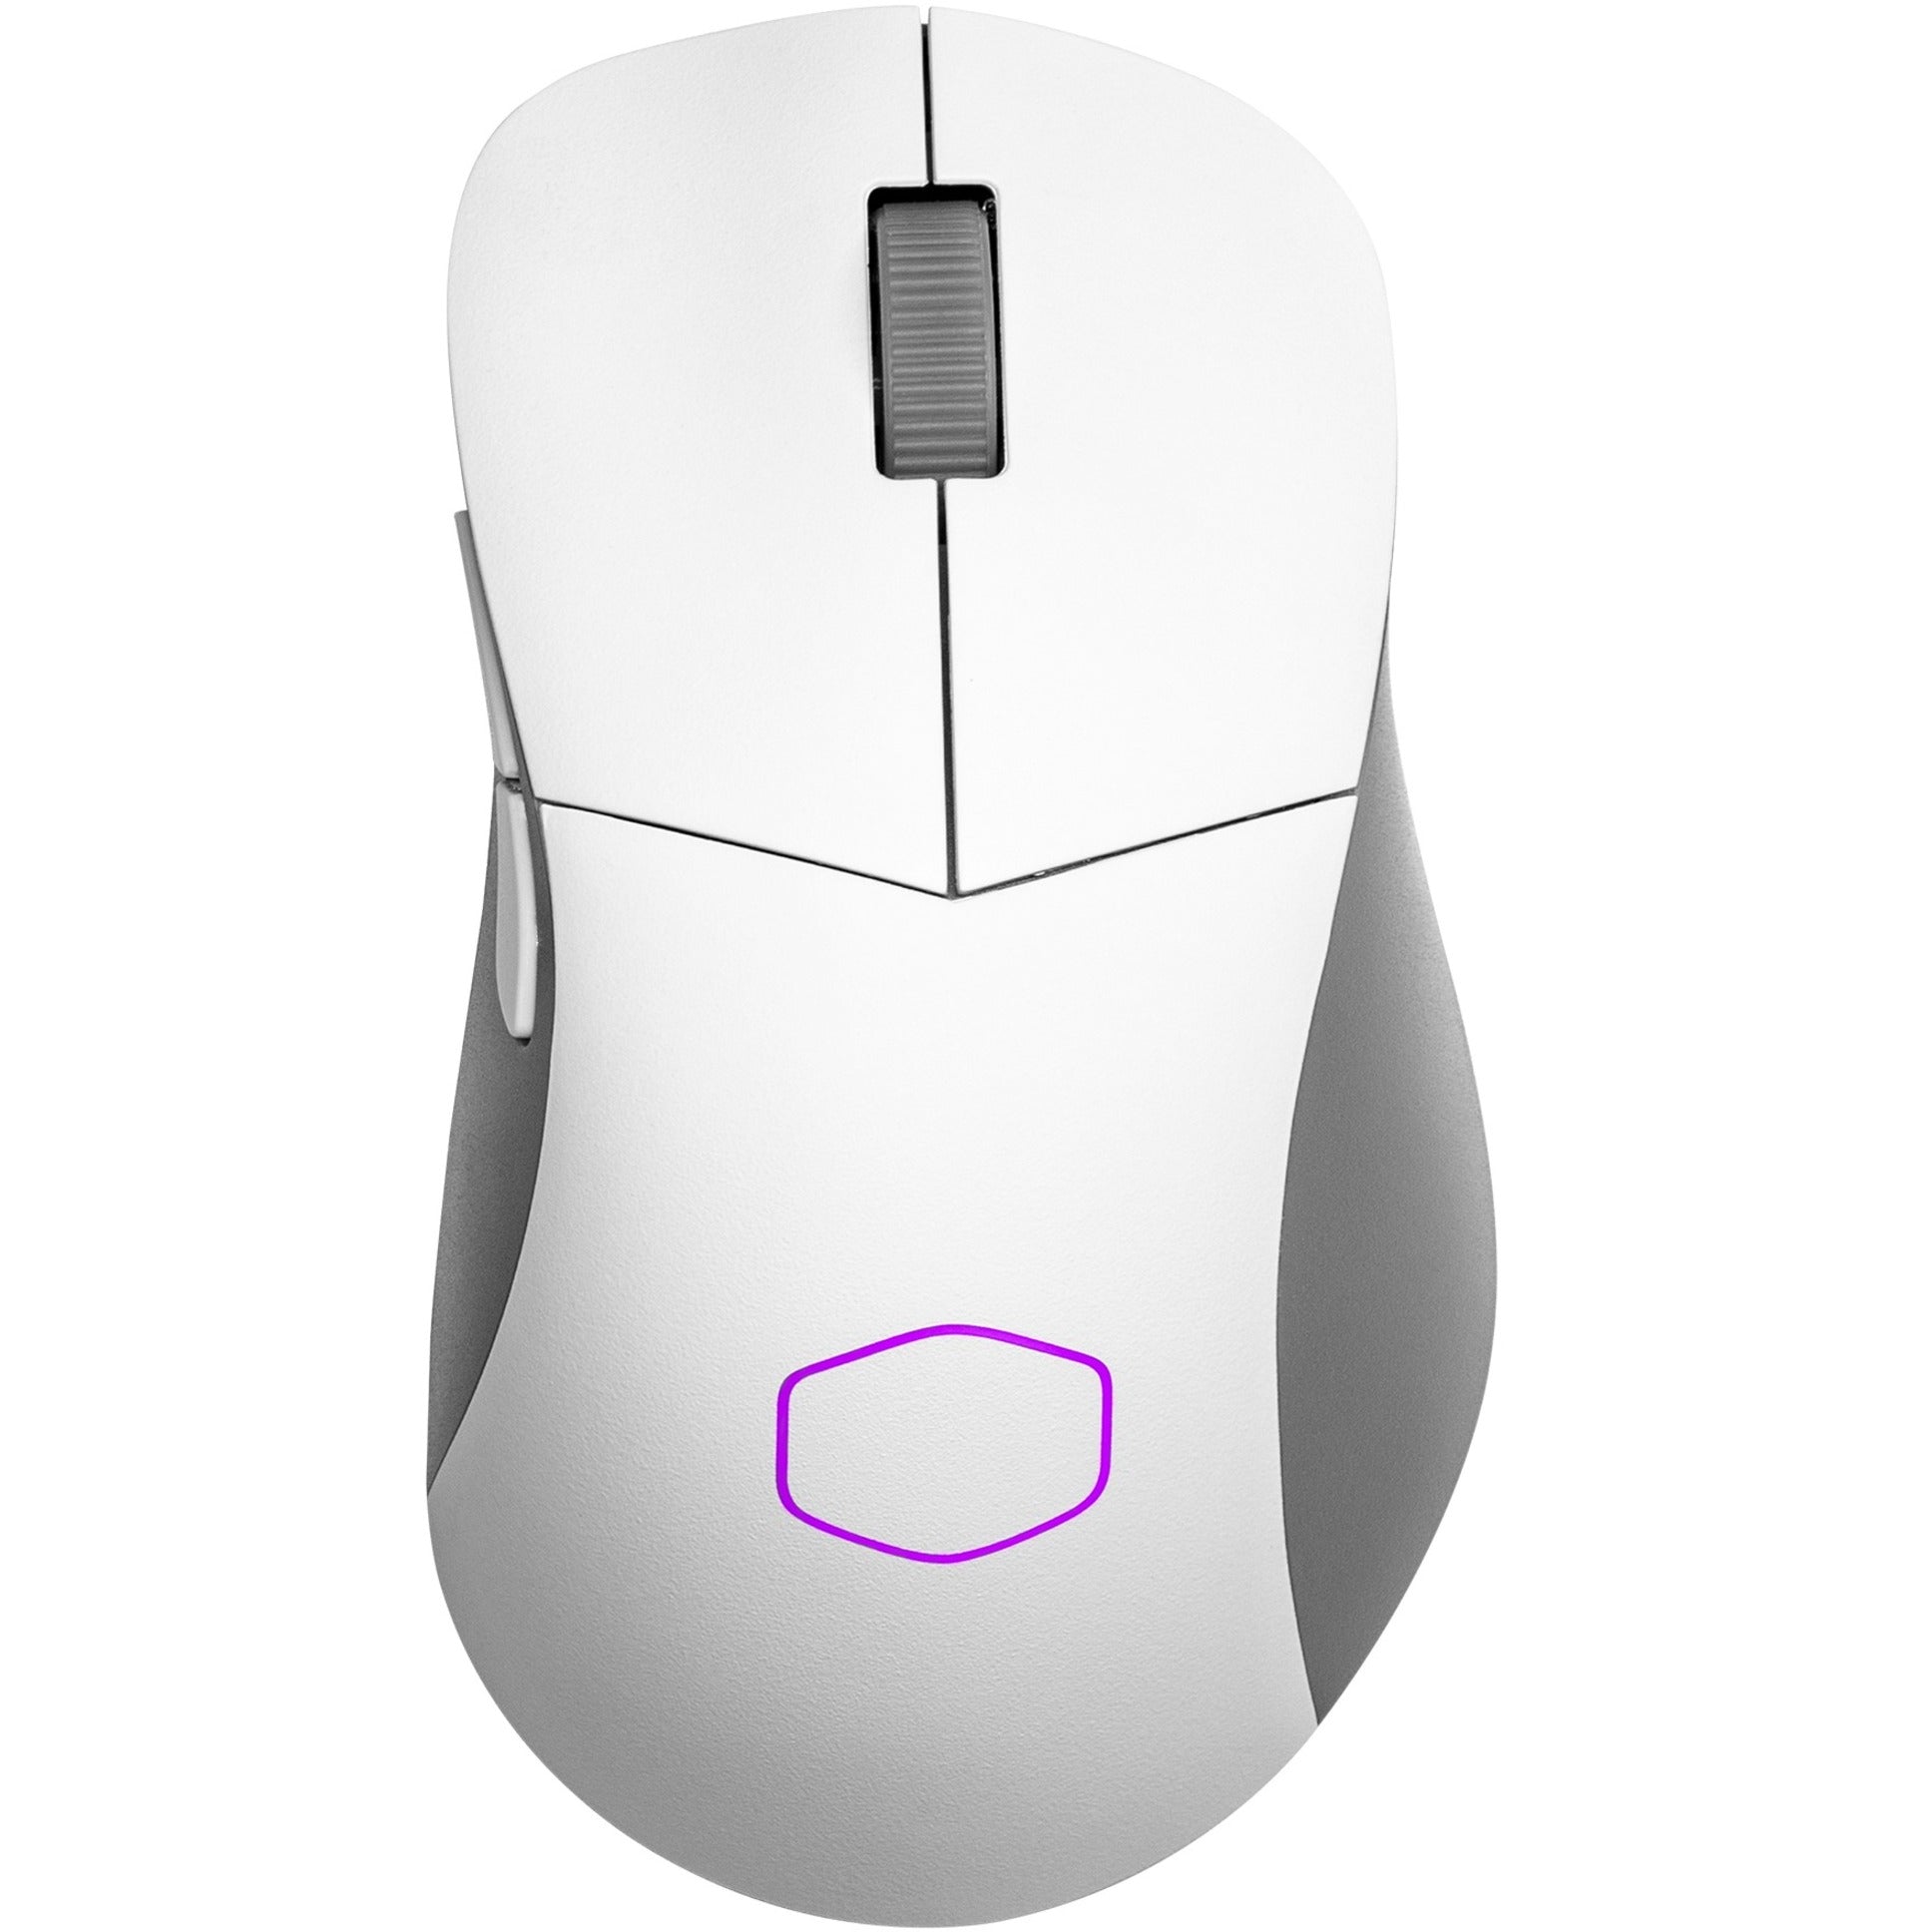 Cooler Master MM-731-WWOH1 Gaming Mouse, Ergonomic Fit, 19000 dpi, Bluetooth 5.1, 2 Year Warranty